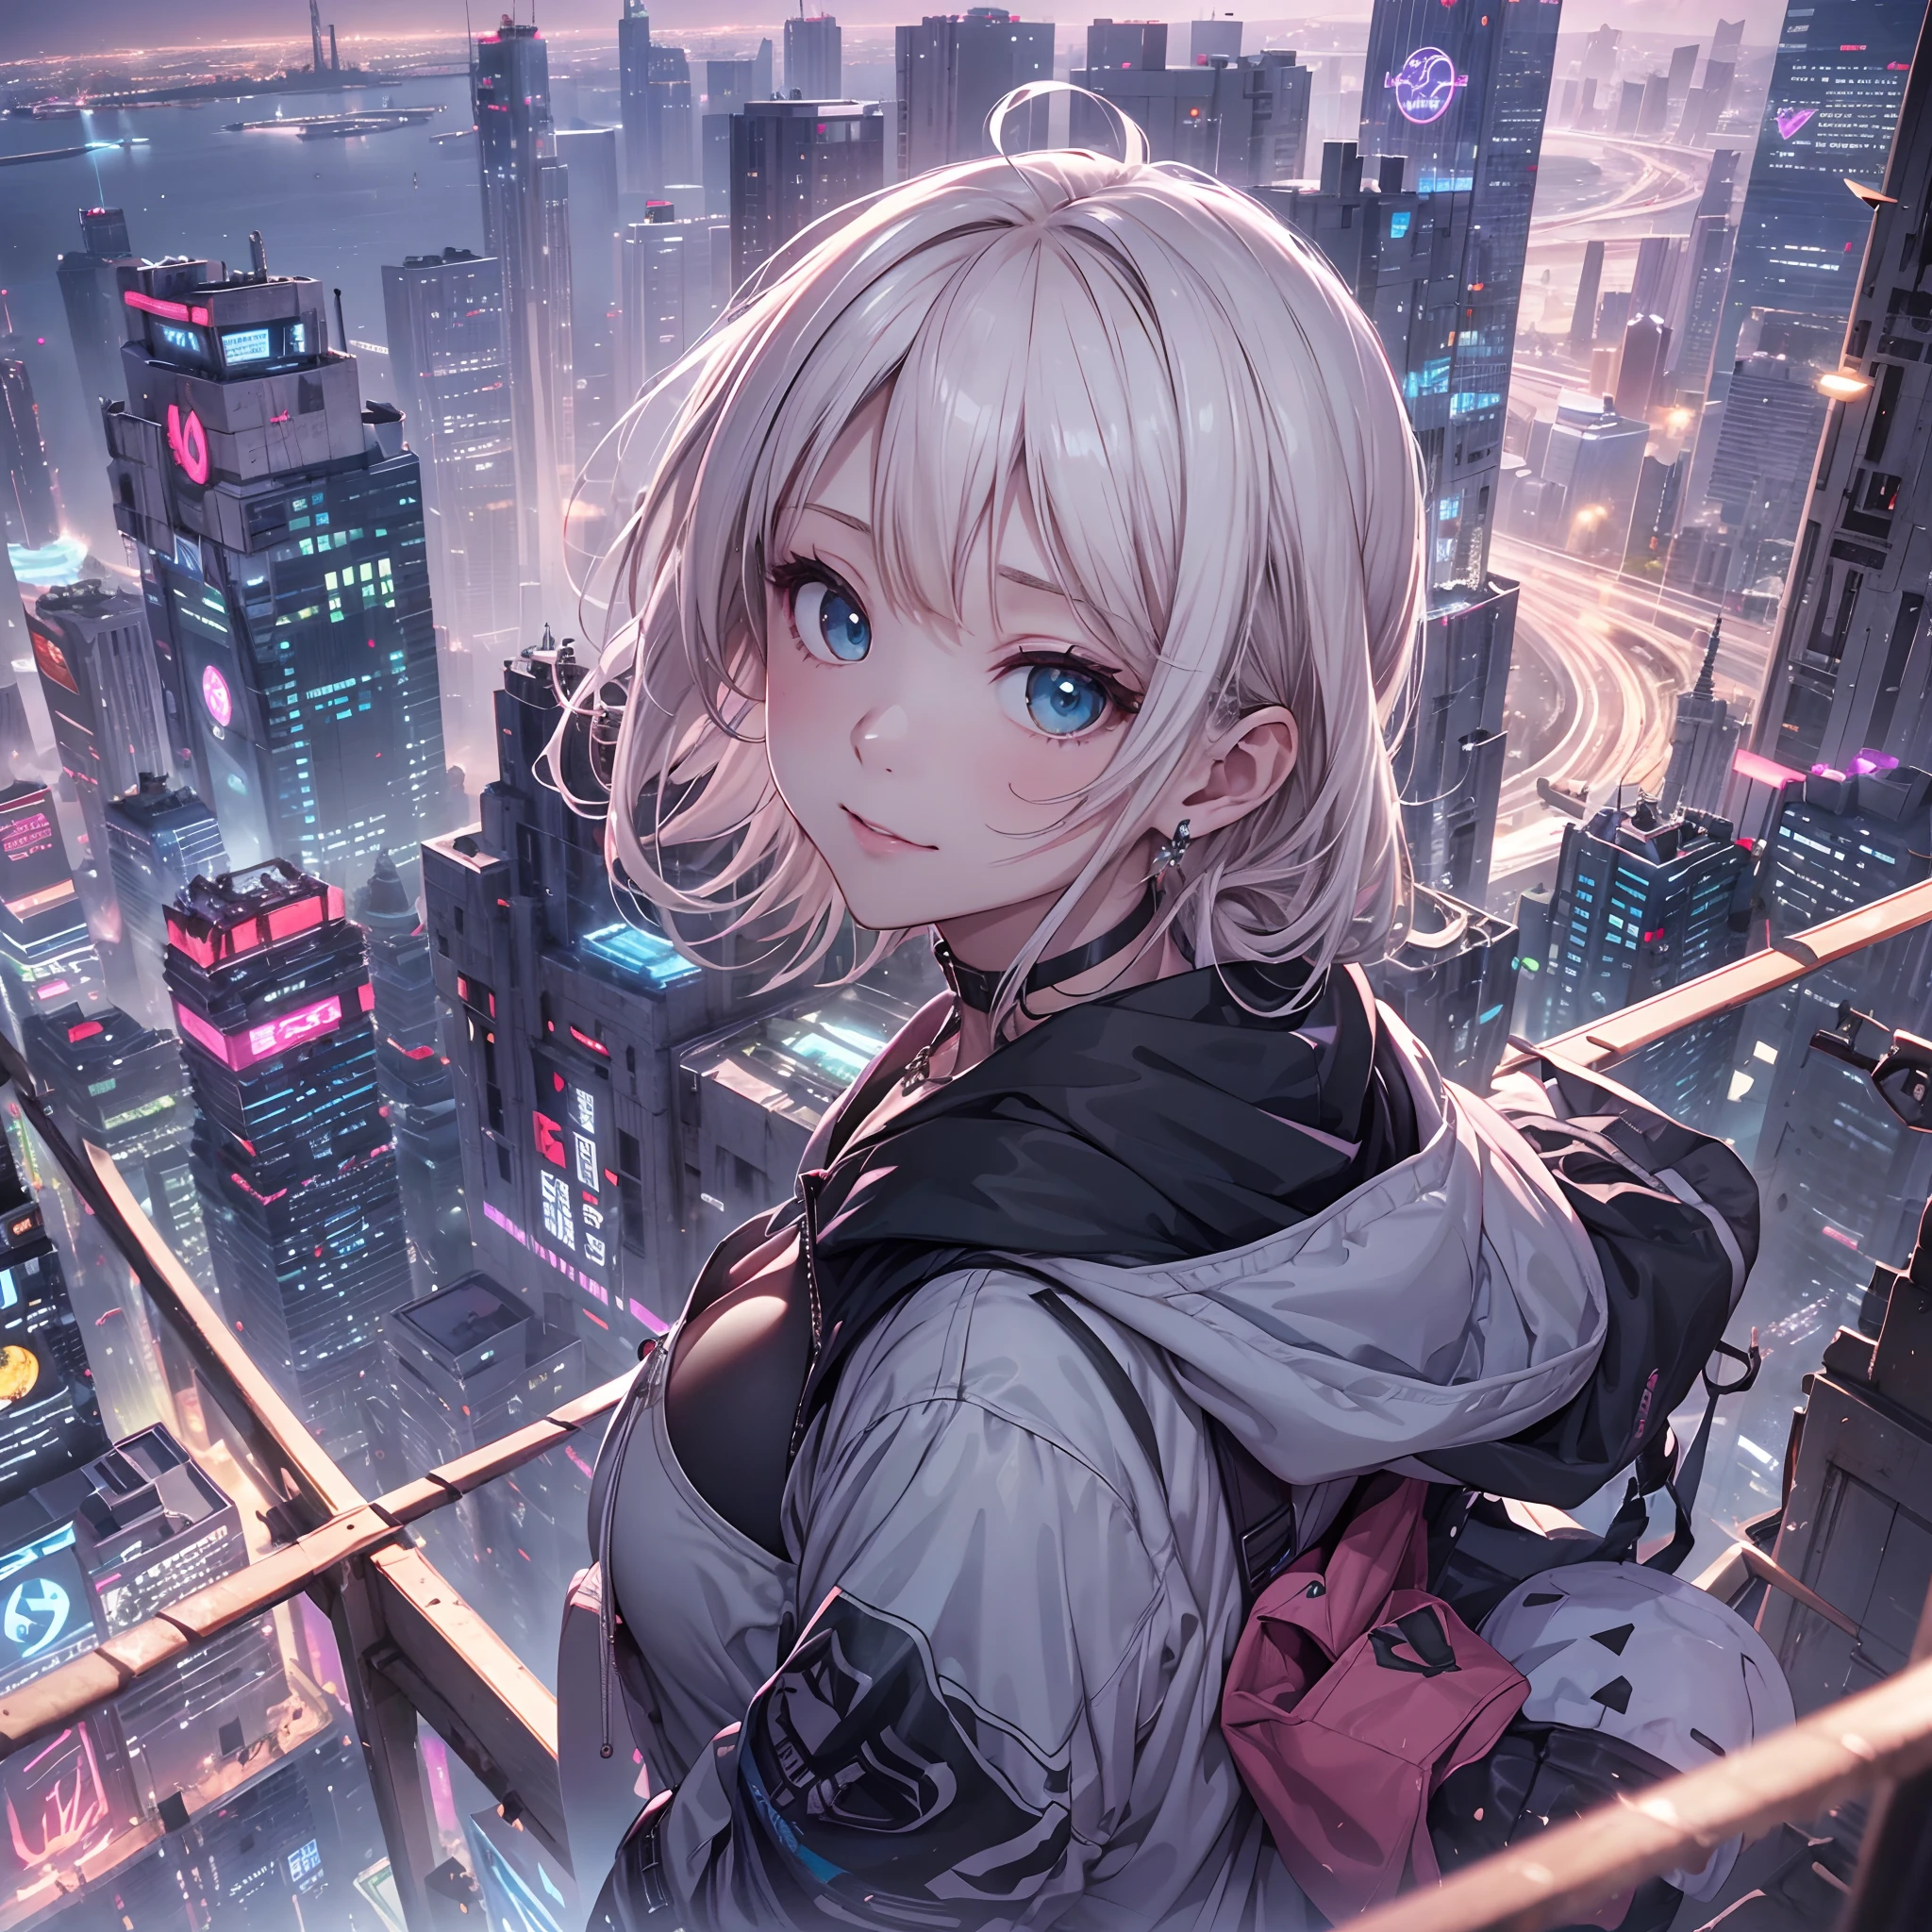 absurderes, hight resolution, (Official art, Beautiful and aesthetic:1.2), best qualtiy、(1girl in:1.8)、(solo:1.7)、Ultra-detail,bright colour, Anime Face、extremely beautiful face and eyes,Naughty smile、(Platinum Blonde Hair:1.4) 、(Short low twin tail),(Pink Open Hoodie)、Colossal 、(cleavage:1.2)、Blushing、(cyan eyes:1.2)、deep in the night、You can see the sea in the distance、Meteor swarm、iridescent lighting、Building Light、Diamond Dust、Superb view、a choker、small earring、(jumpping)、raise two hands、(Black Plaided Pleated Skirt),IsometricFuture, Anime Style School, Isometric cutaway, nigh sky, (Urban landscape of the near future), depth of fields, Full-HD, Rim lighting, Vivid and sharp cinematic lighting, shadowy, chromatic abberation, Art by Art Germ, greg rutowski, Square Enix, unreal enginee 5, FXAA, IsometricFuture、Pink light、purple lights、Yellow-green light、(Cyber City)、(Near Future City)、Ruins、